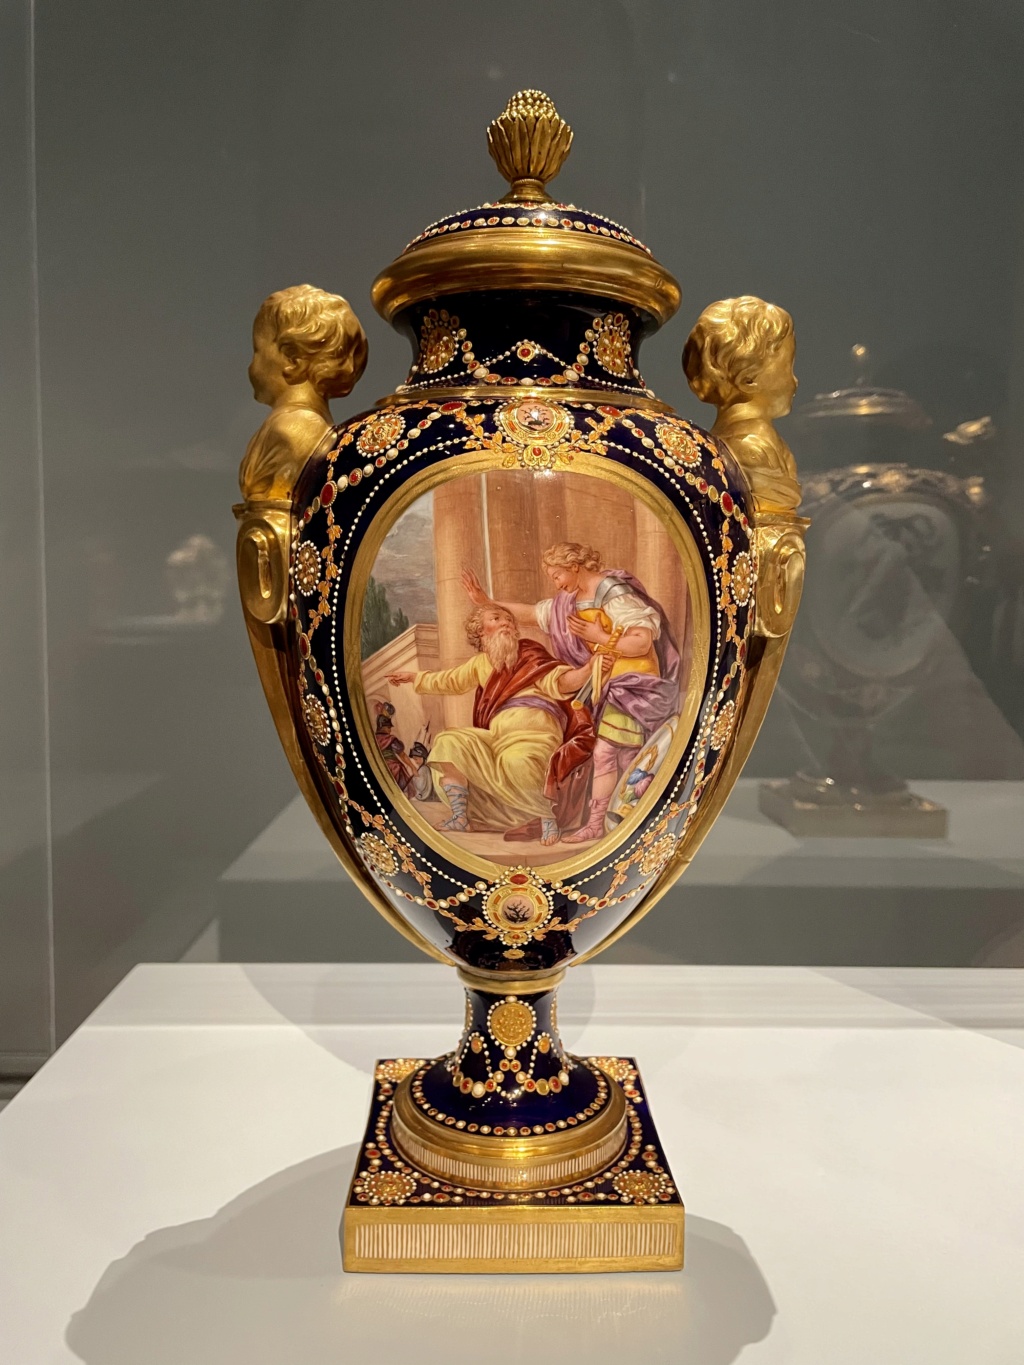 Exposition : Porcelain from Versailles Vases for a King & Queen. Getty Center, Los Angeles 6aeb5210